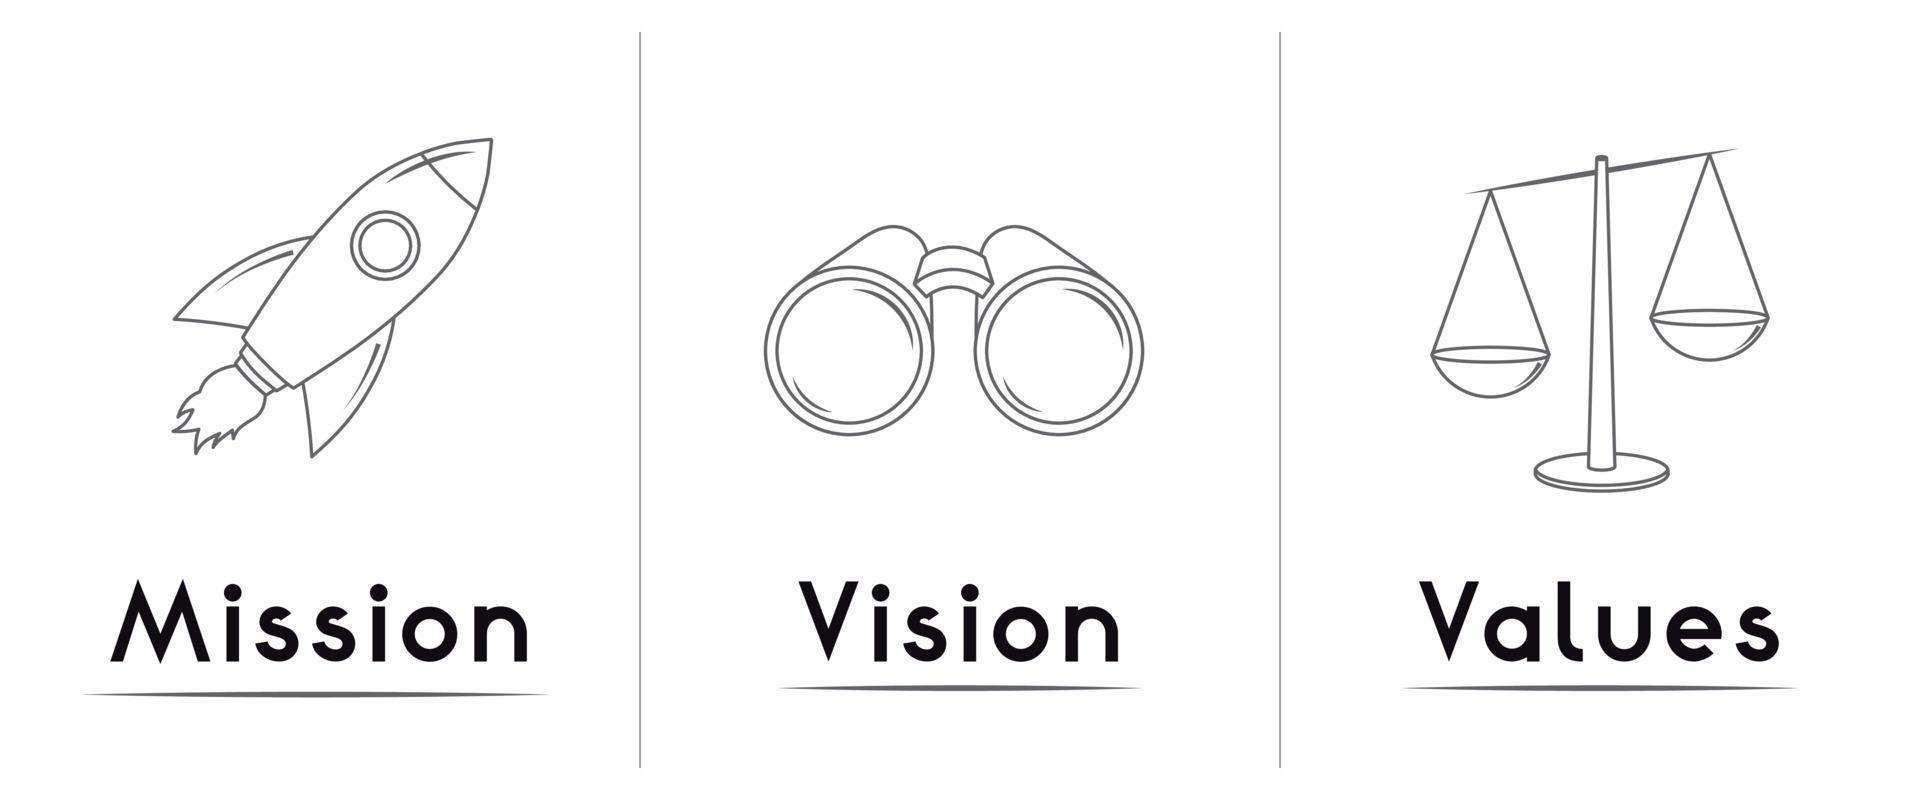 Mission Vision Values Concept vector